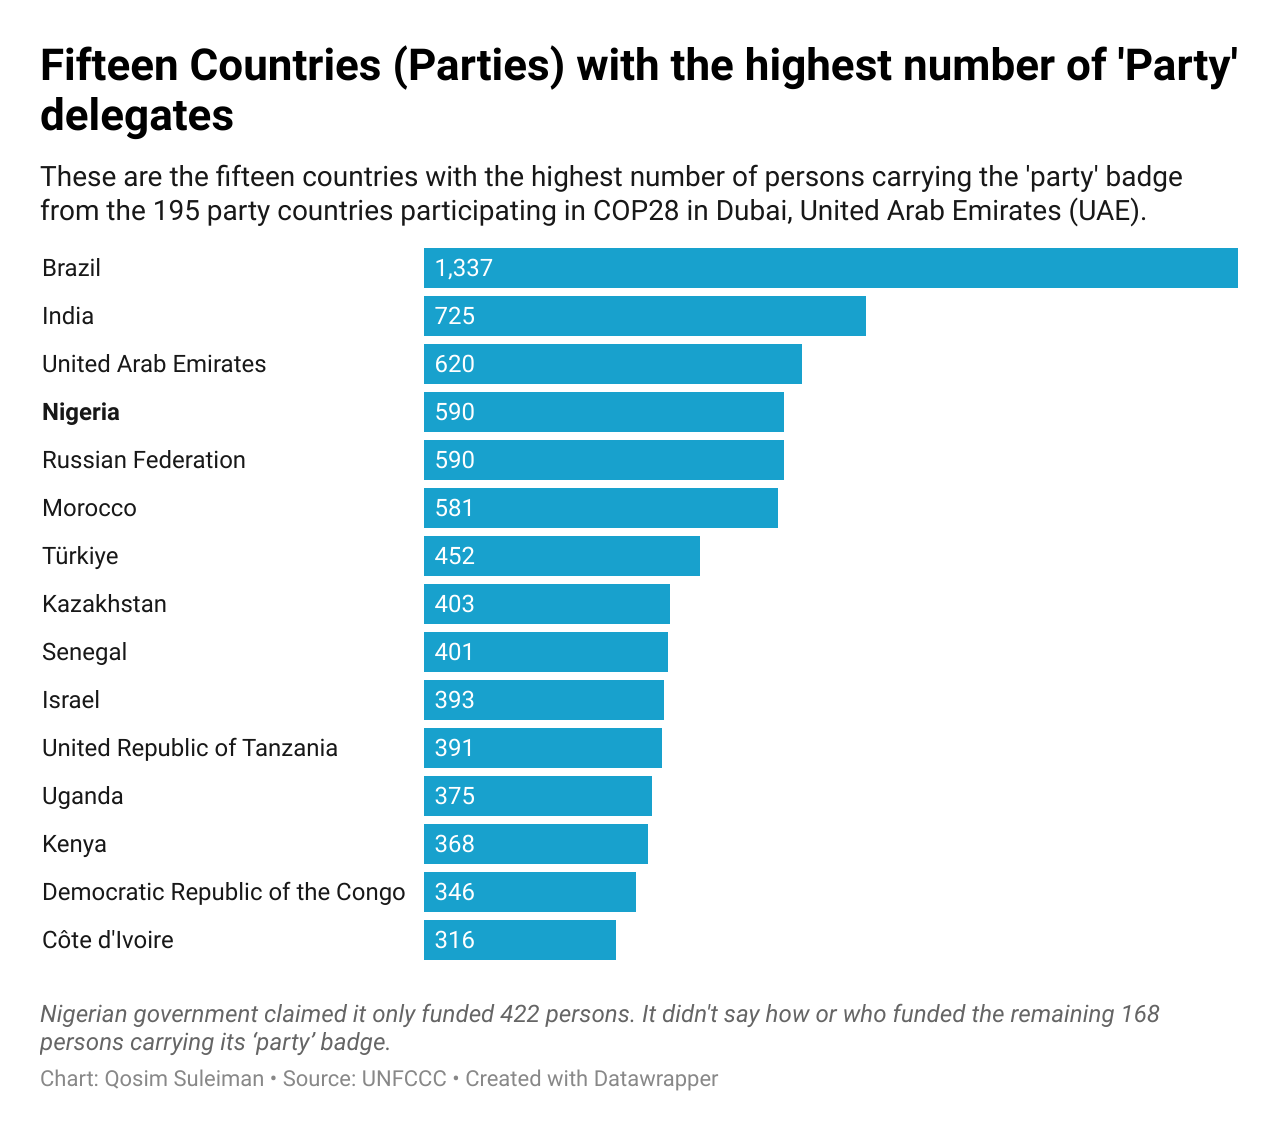 Fifteen countries with the highest number of ‘Party delegates’